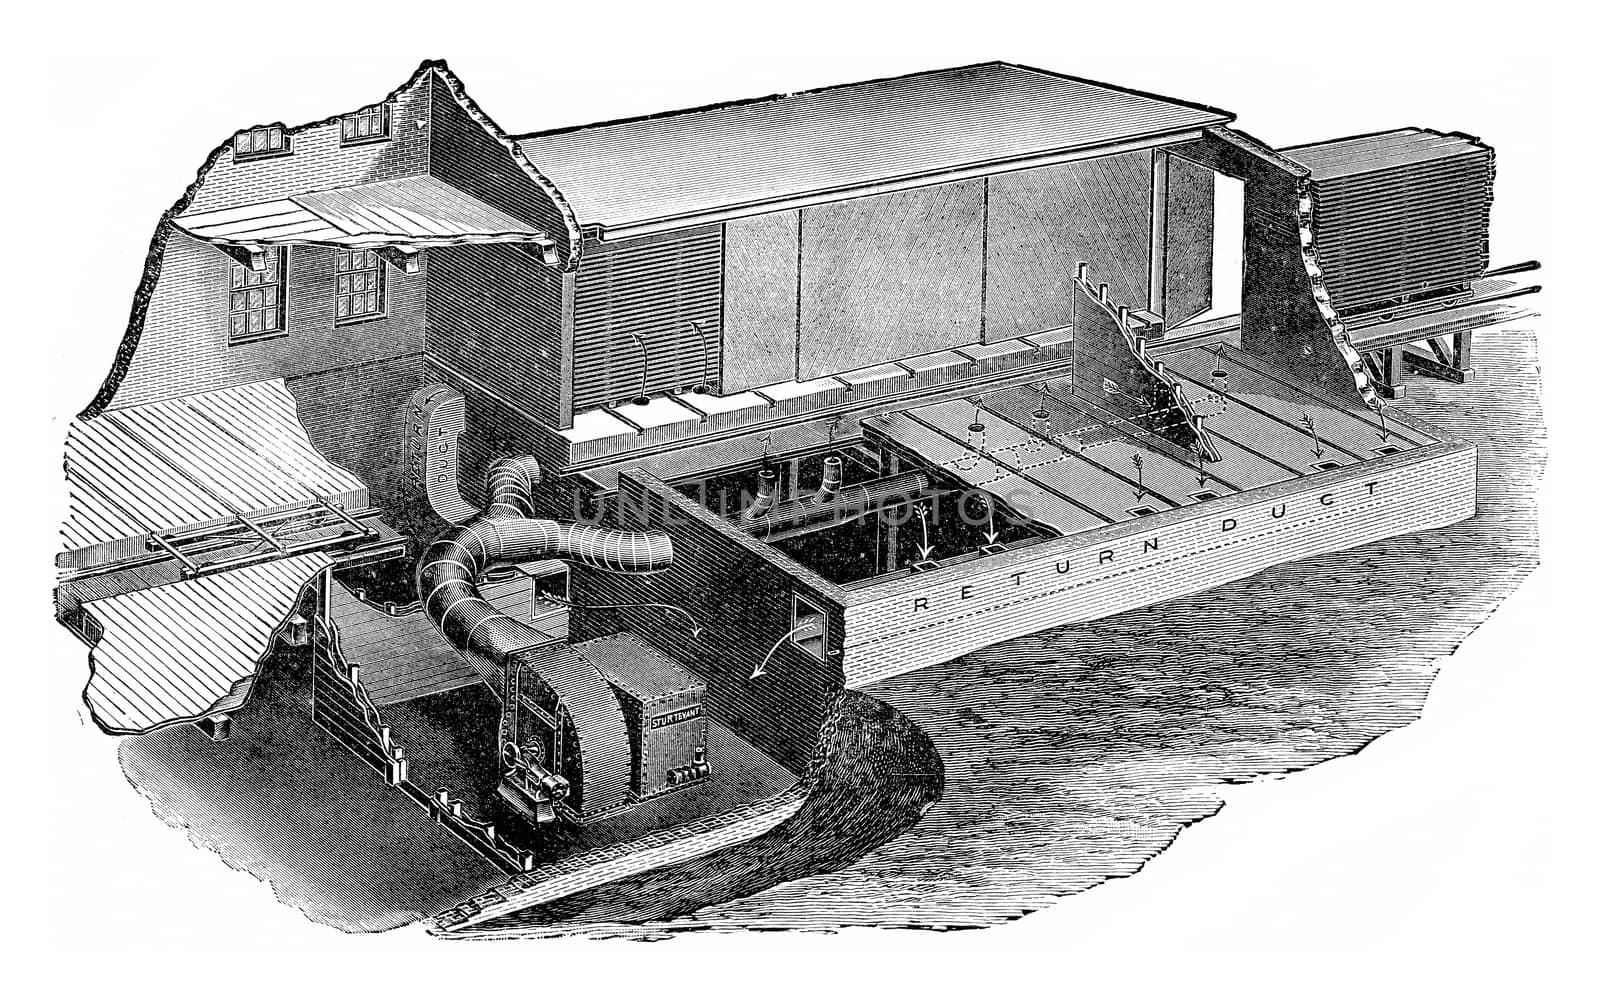 Another device for the progressive drying of wood (Systeme Sturtevant), vintage engraved illustration.
